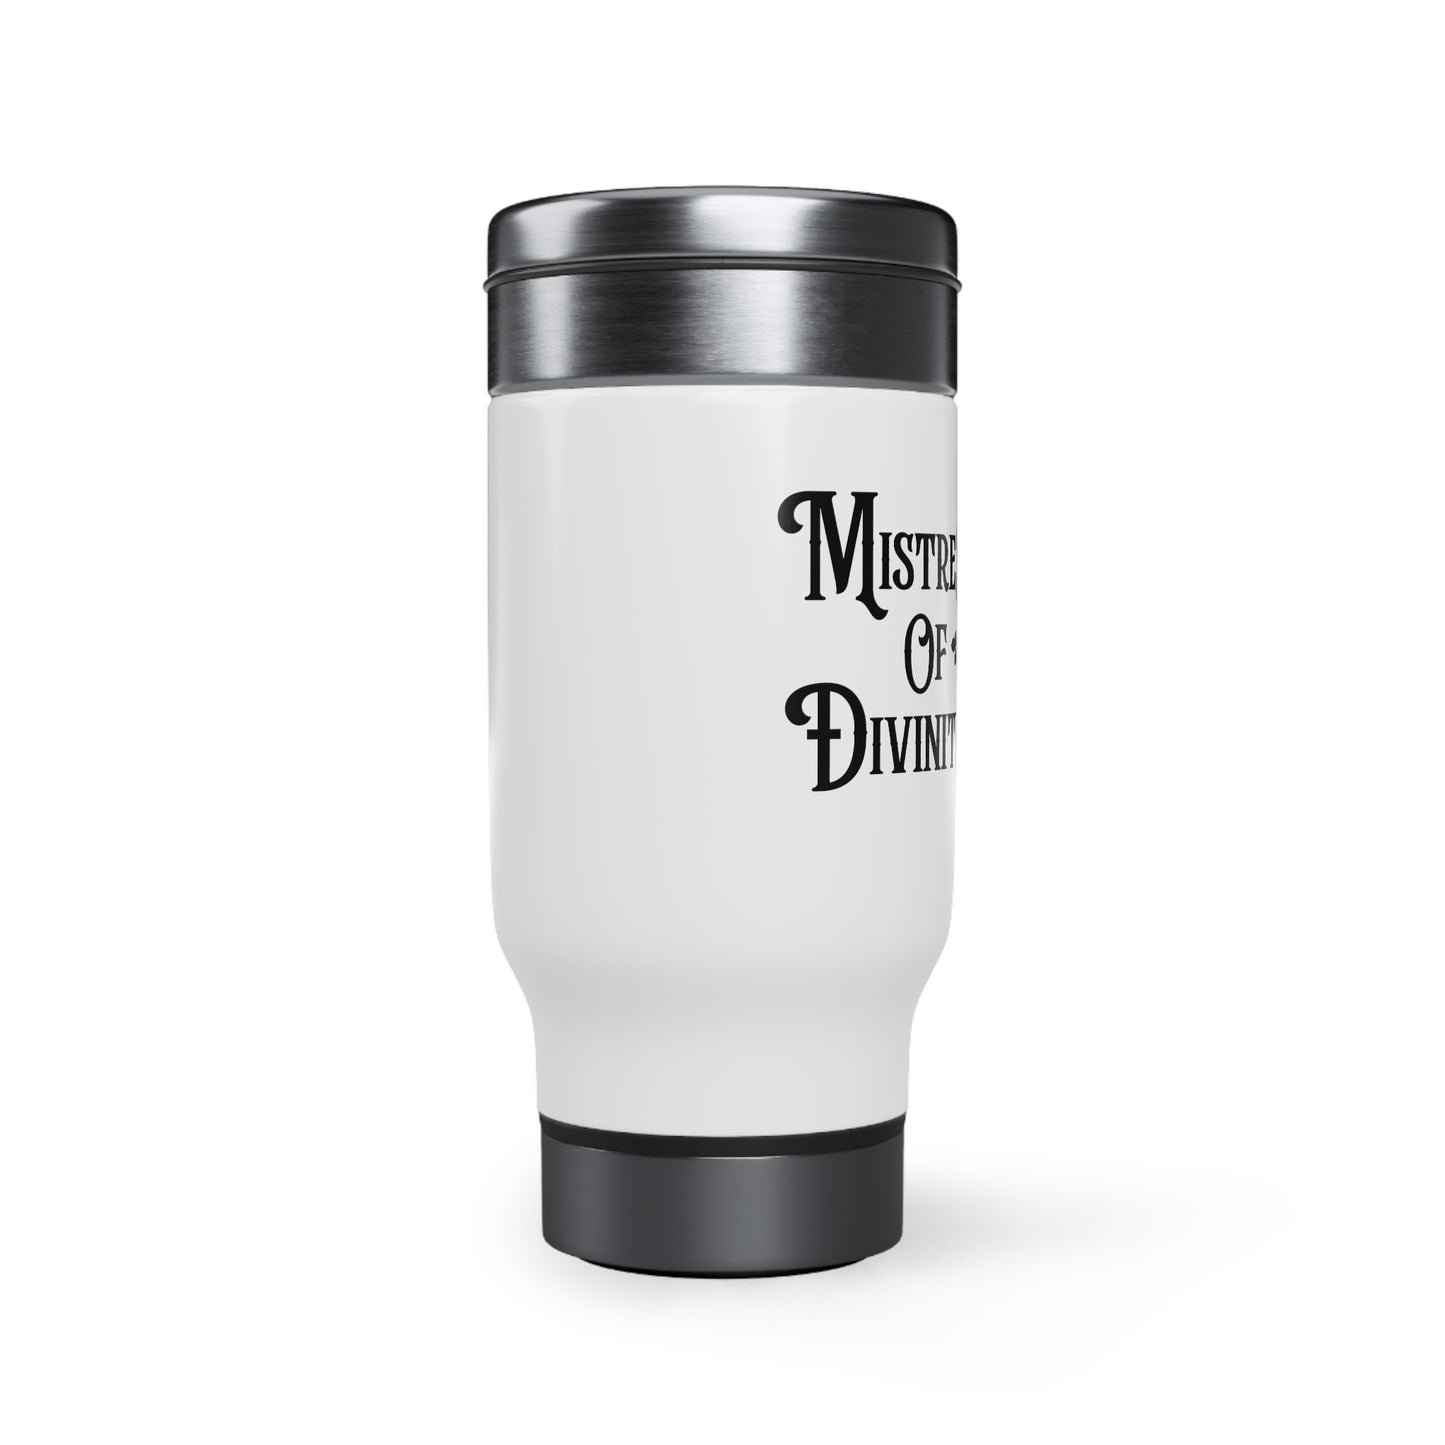 Mistress of Divinity Stainless Steel Travel Mug with Handle, 14oz Pastor Cup Pastor Gift for Minister Gift for Seminarian Graduation